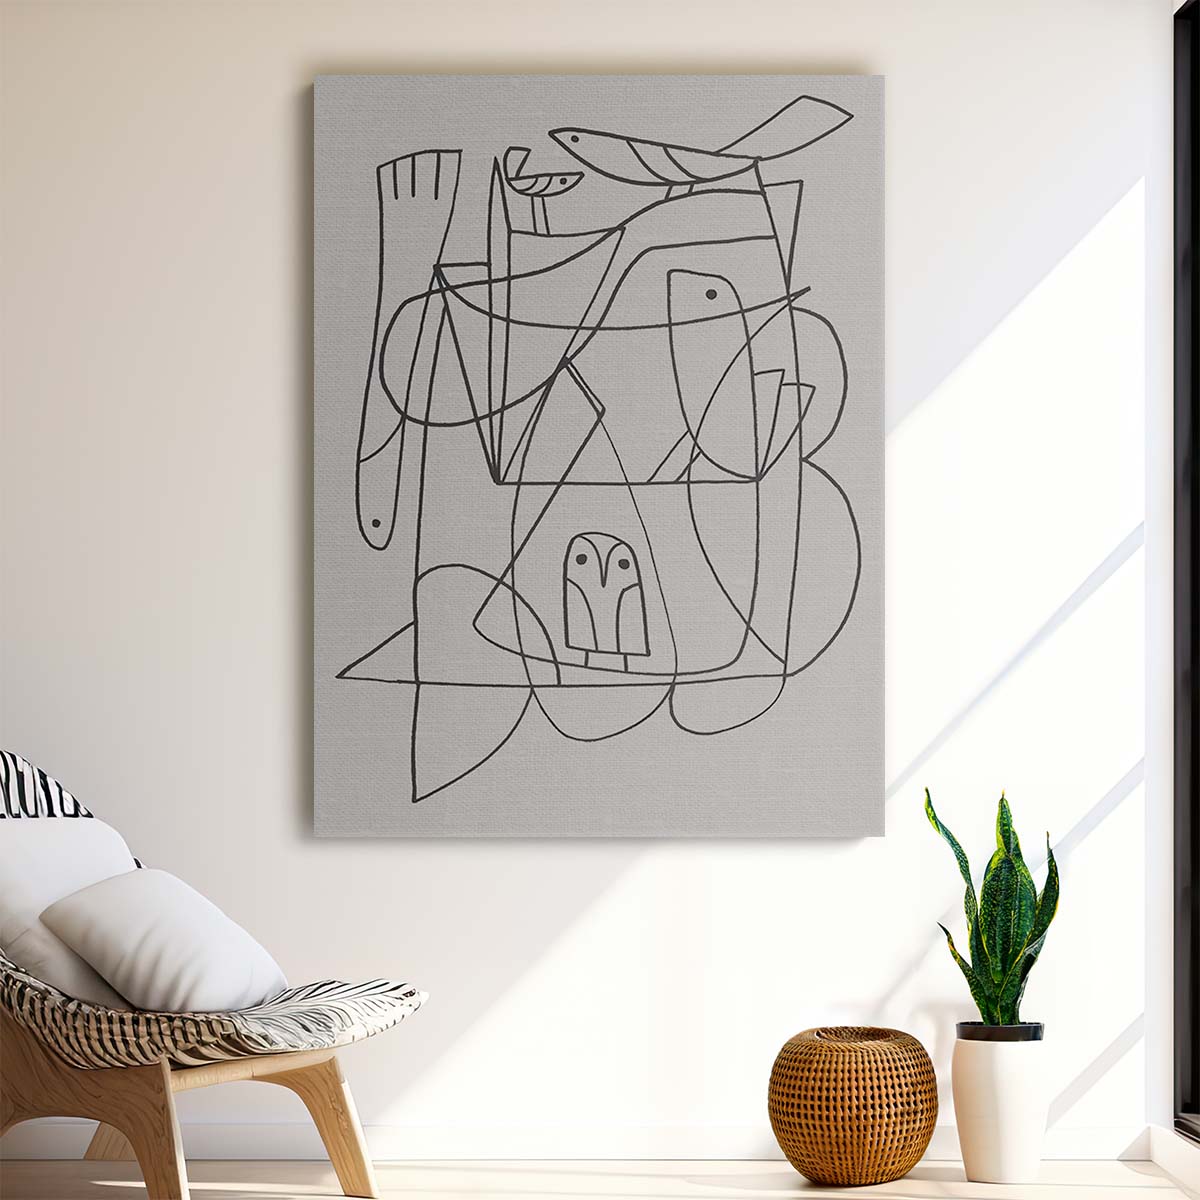 Minimalistic Abstract Bird Illustration by Dan Hobday, Modern Geometric Art by Luxuriance Designs, made in USA